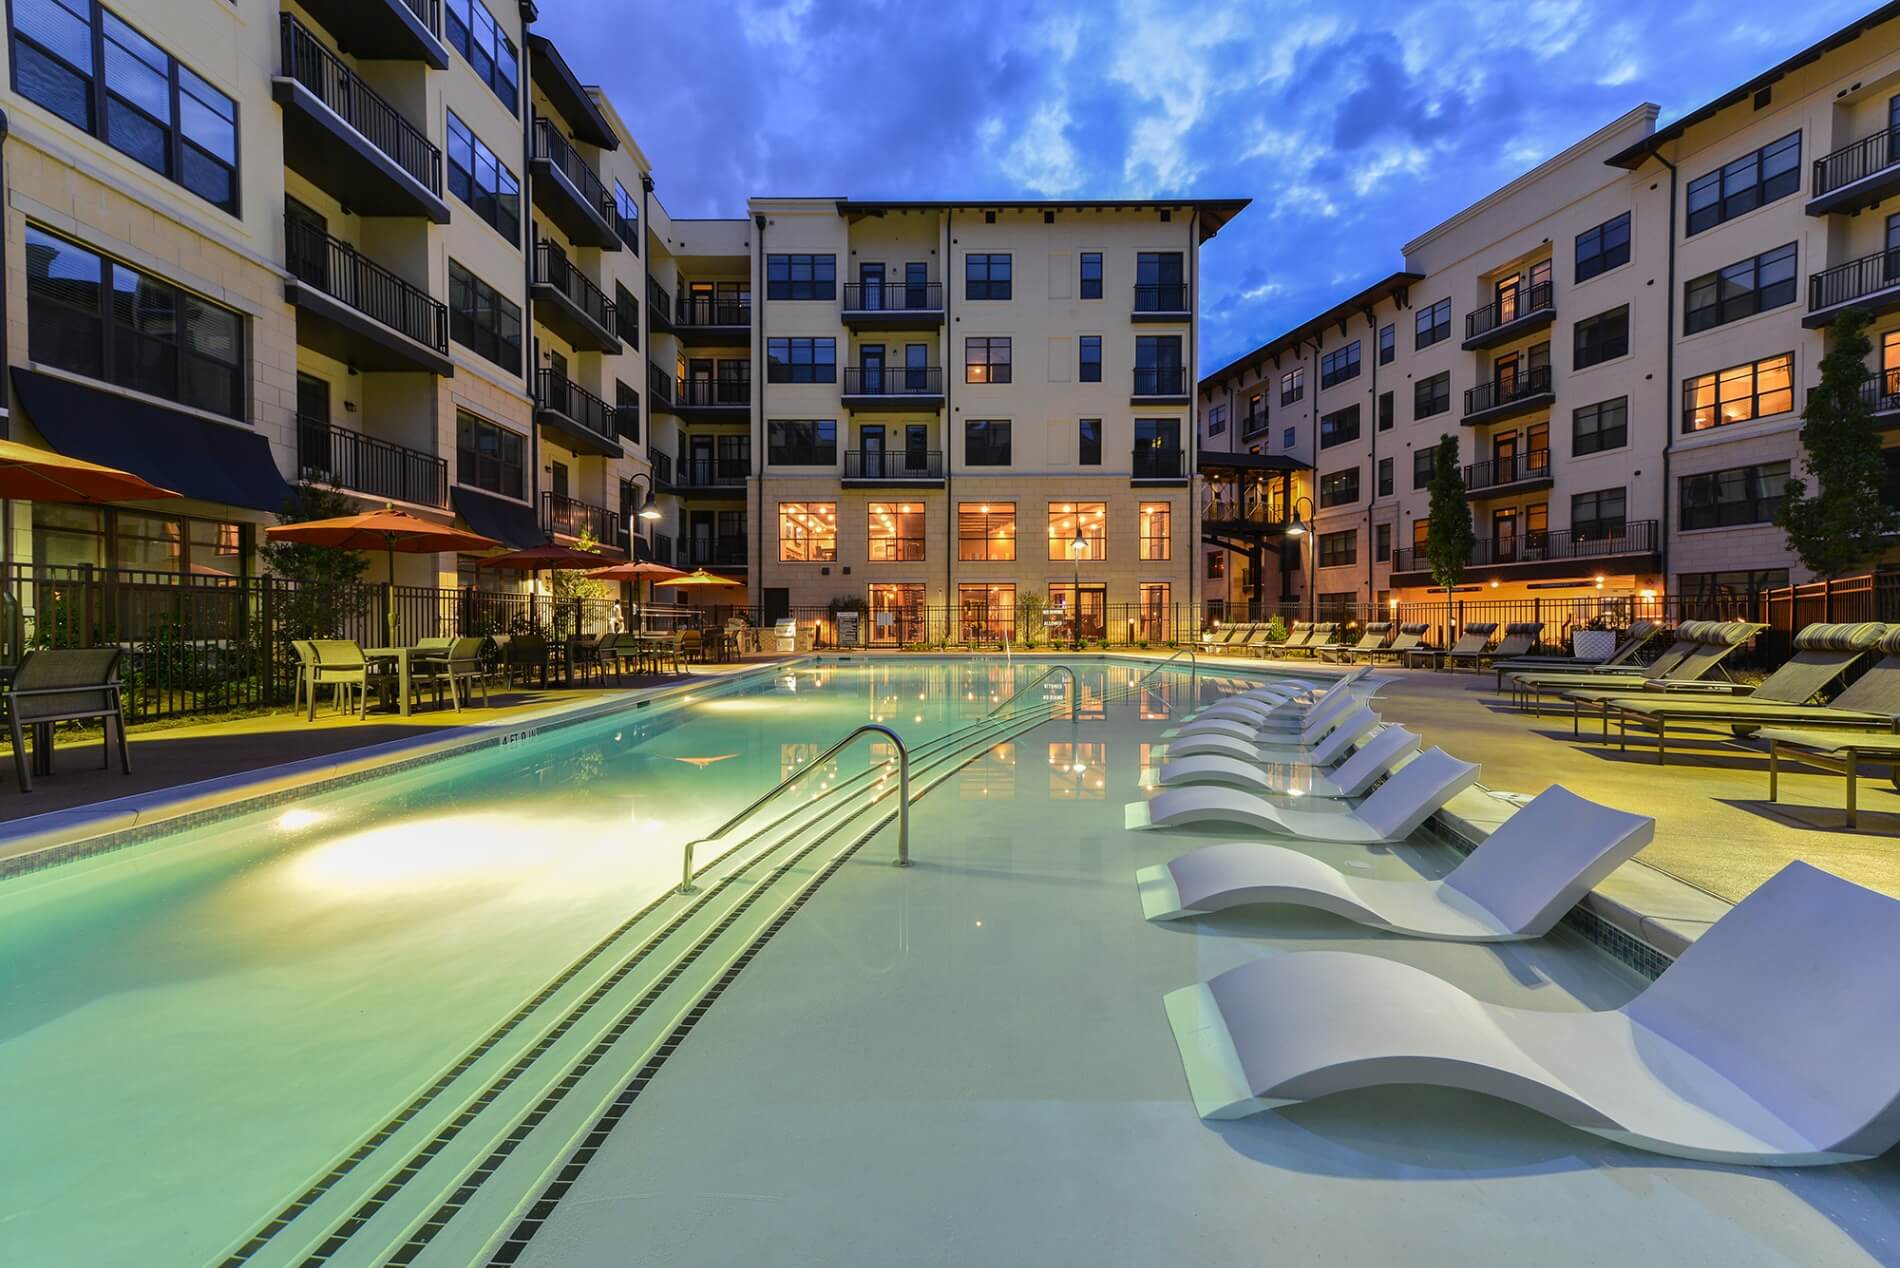 Night time view of pool with in pool lounge chairs. Lounge chairs outside the pool and covered tables and chairs. All surrounded by residential buildings.